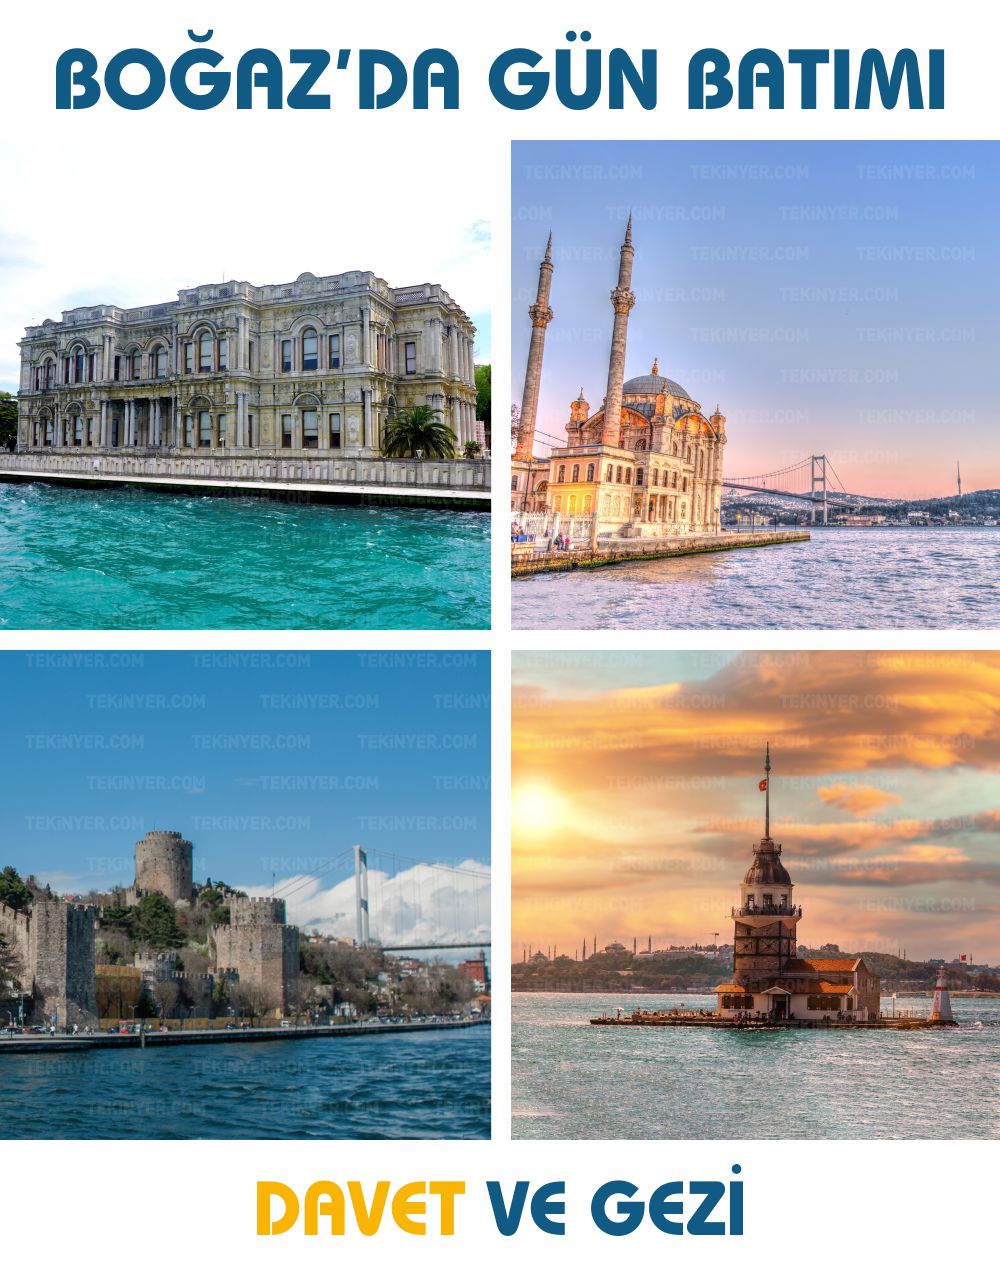 Istanbul Yacht Tours